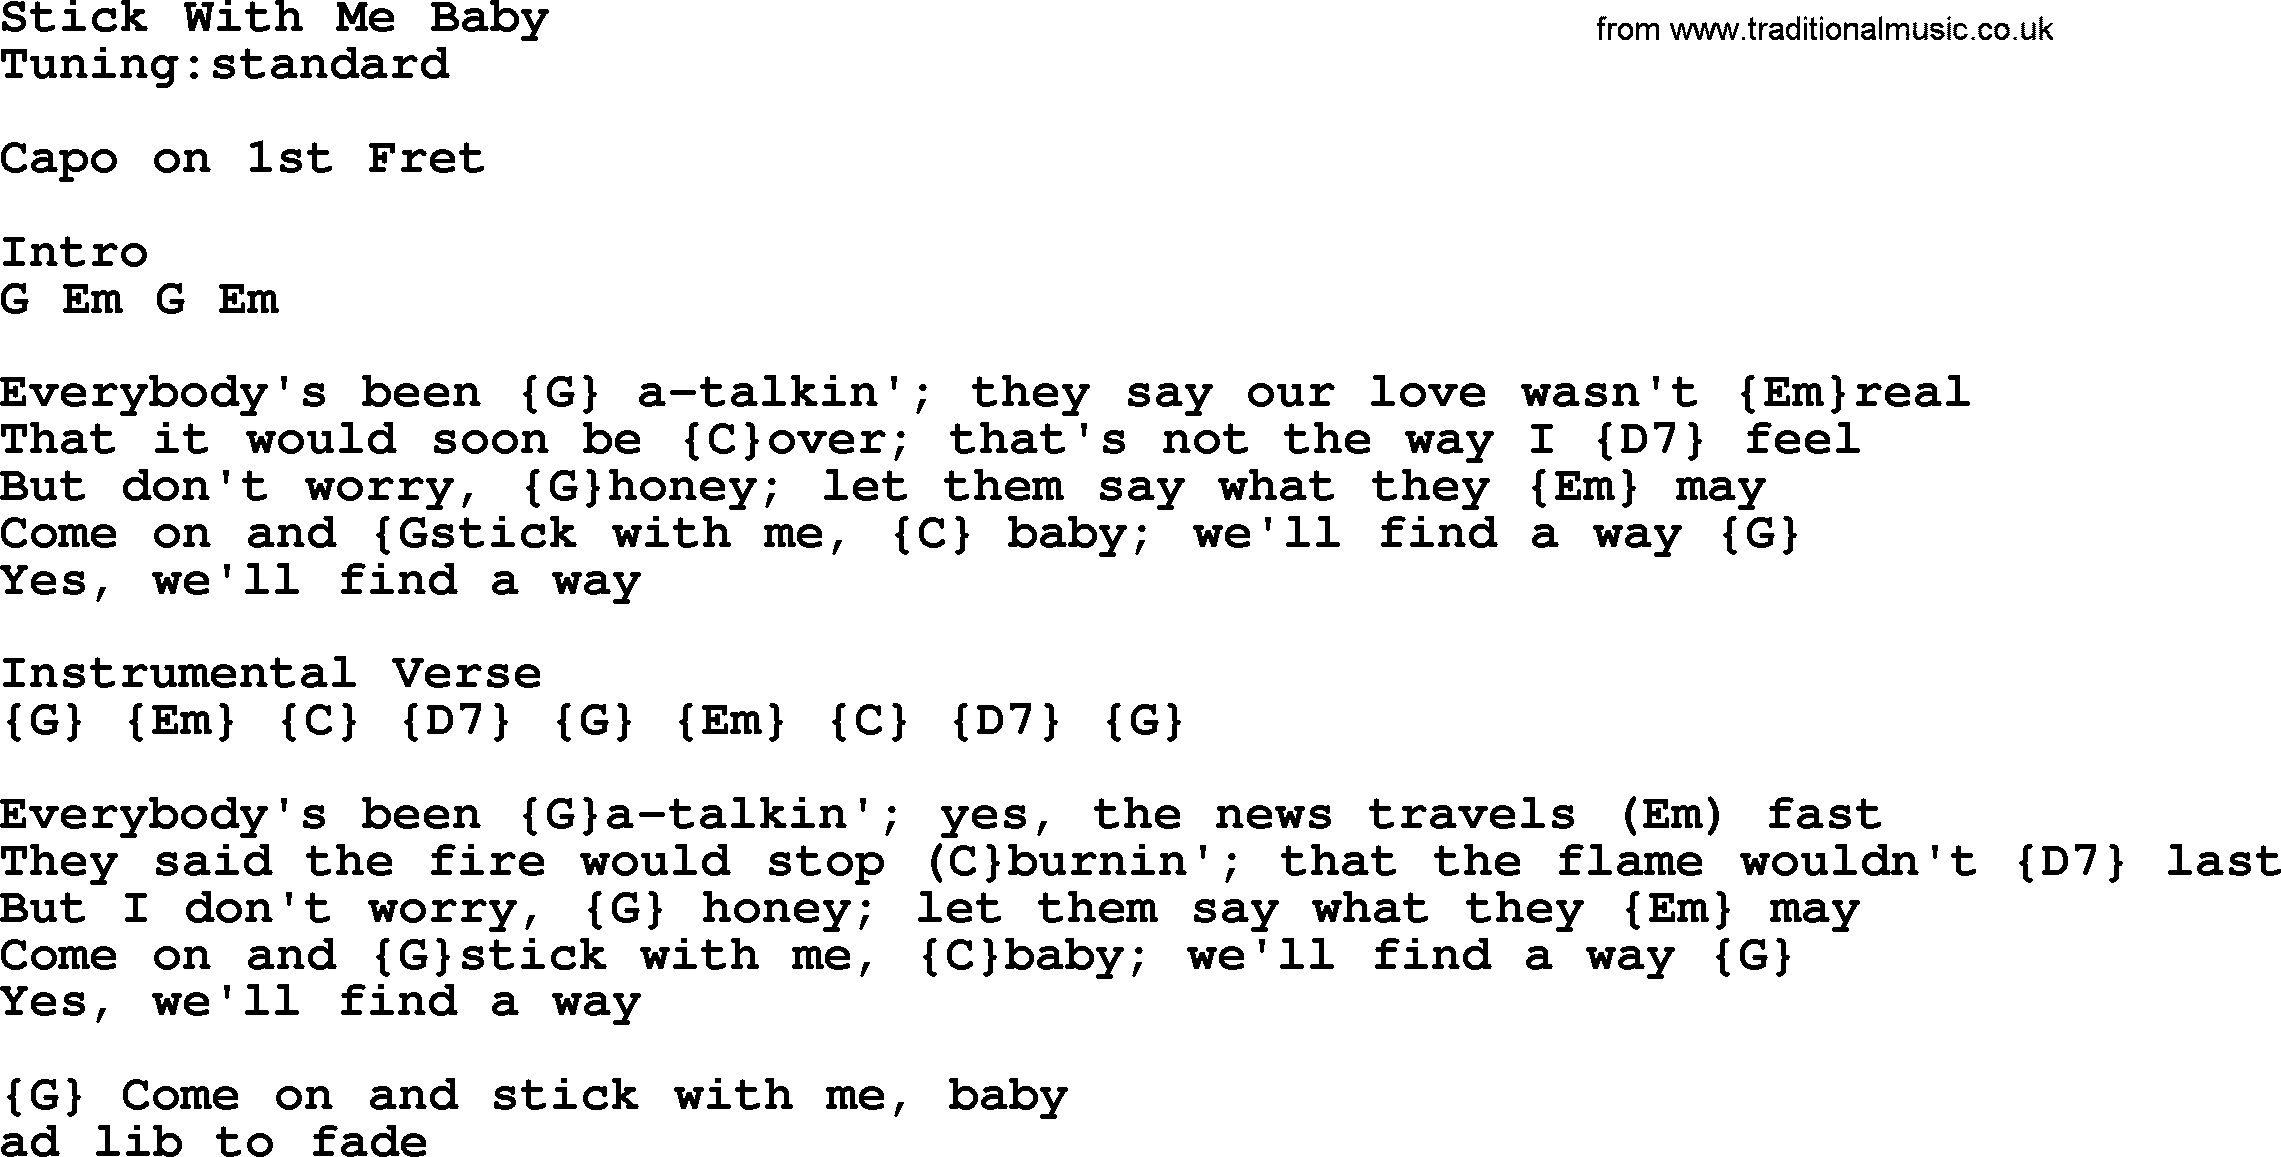 Bluegrass song: Stick With Me Baby, lyrics and chords